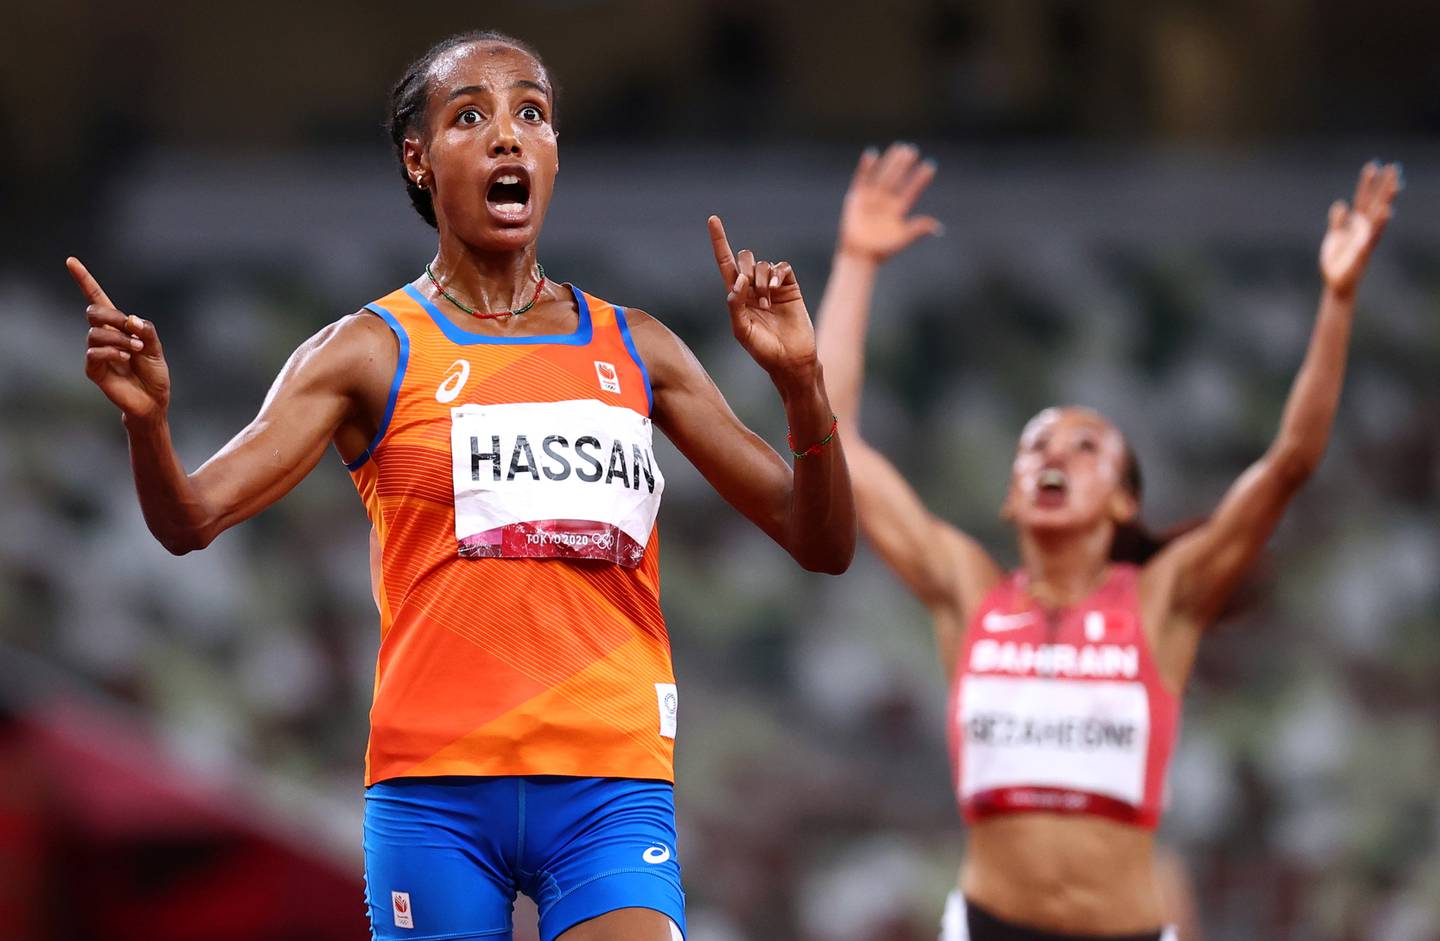 For many refugees, Hassan's historic accomplishment at the Tokyo Olympics was symbolic, showing what can be done to overcome life's challenging obstacles. Reuters